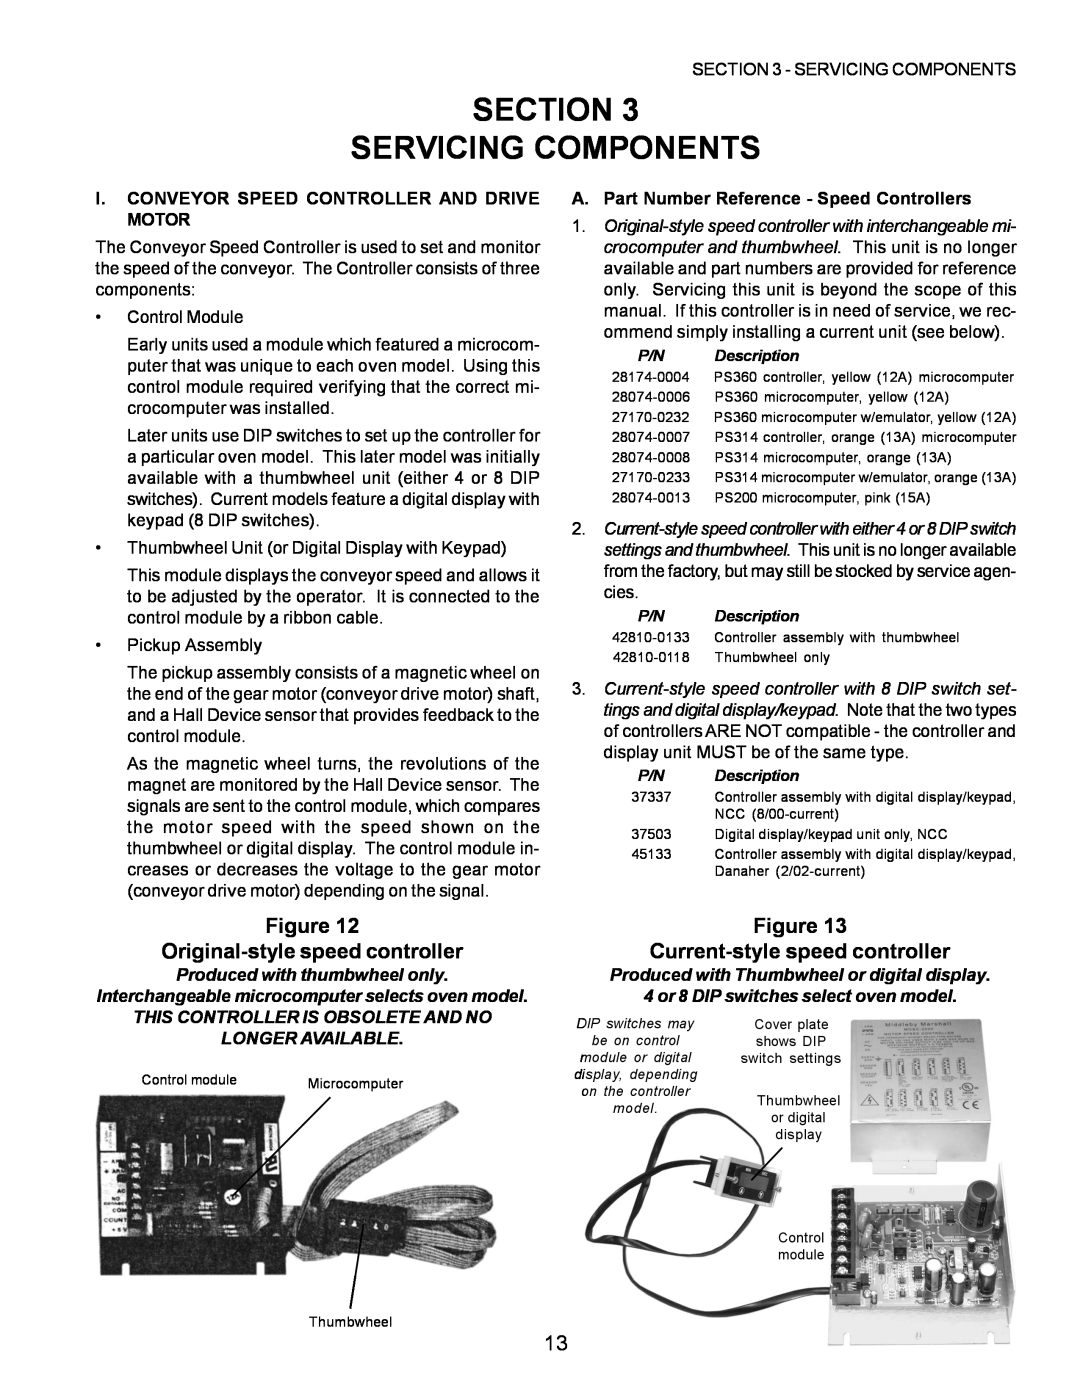 Middleby Marshall PS200 Section Servicing Components, Original-style speed controller, Current-style speed controller 